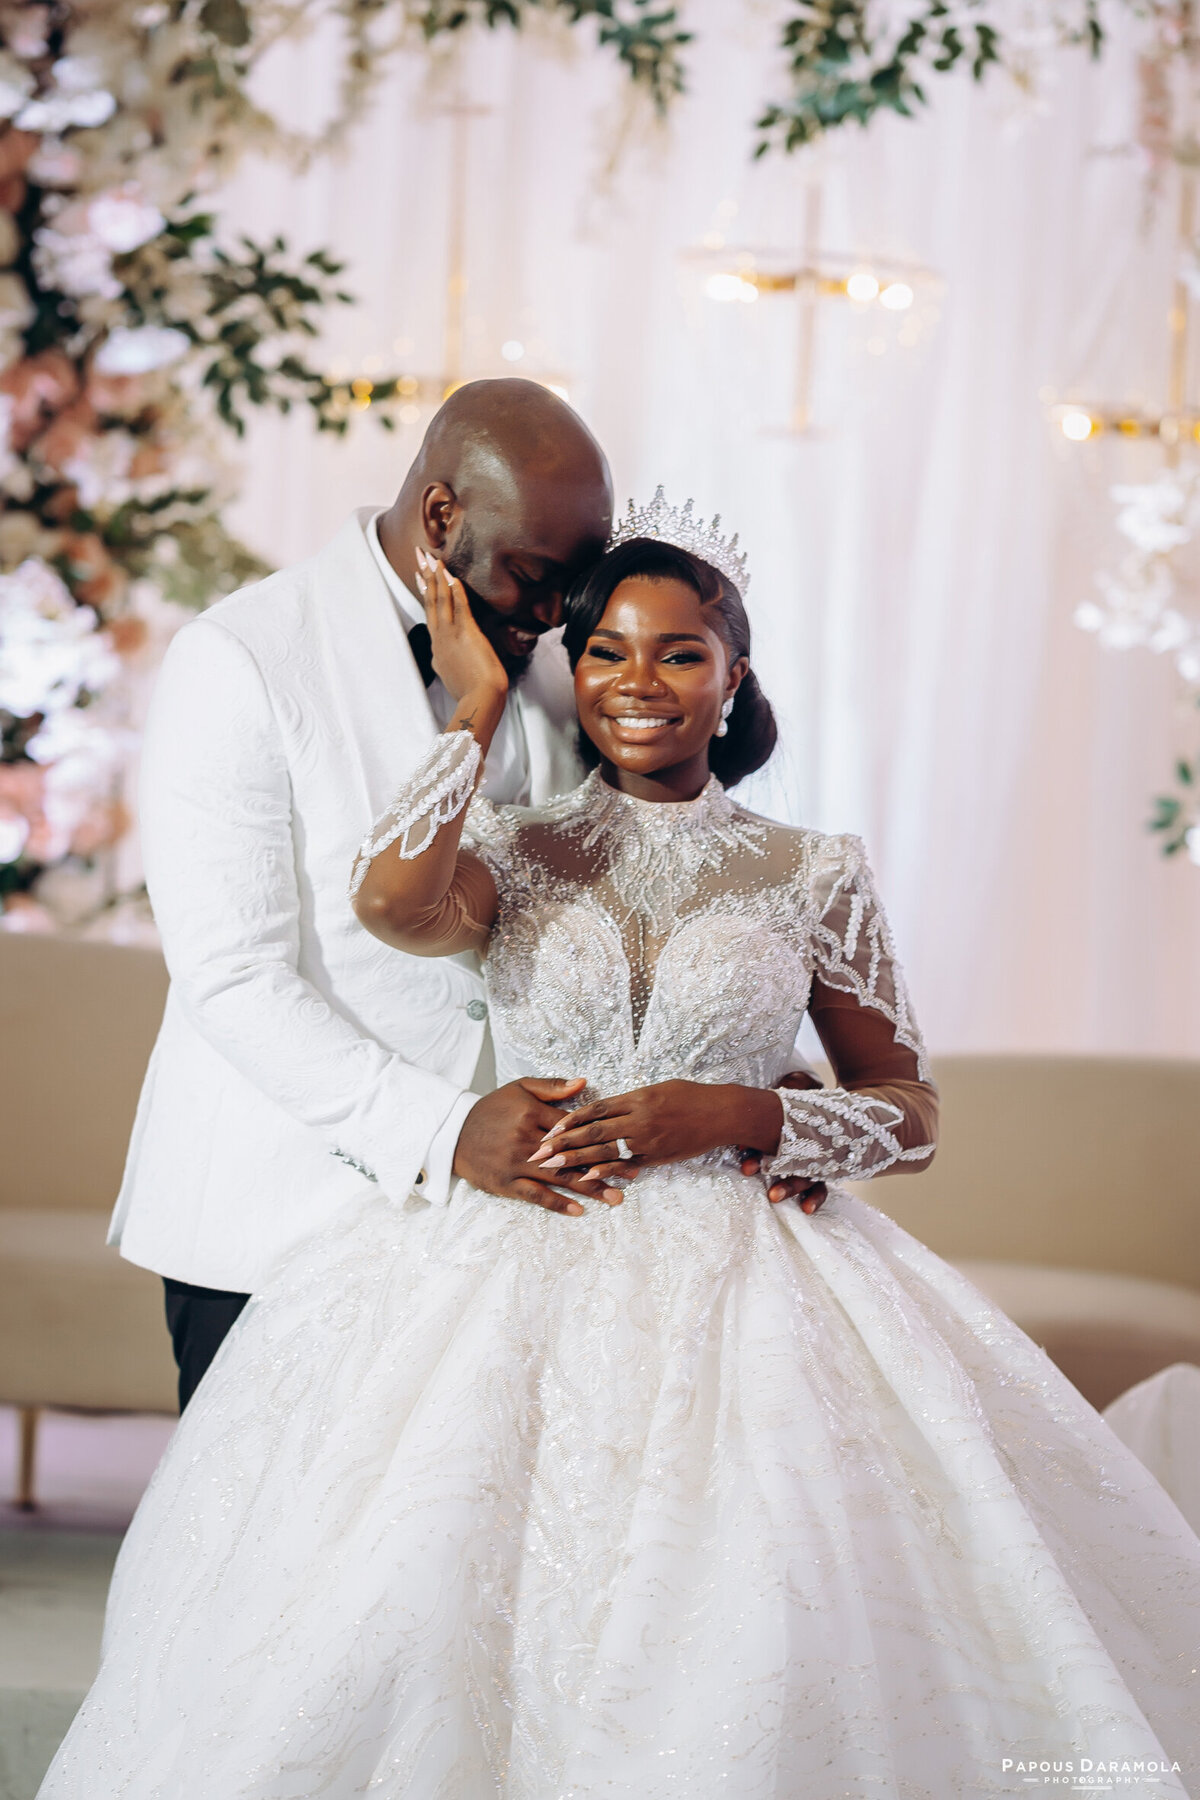 Abigail and Abije Oruka Events Papouse photographer Wedding event planners Toronto planner African Nigerian Eyitayo Dada Dara Ayoola outdoor ceremony floral princess ballgown rolls royce groom suit potraits  paradise banquet hall vaughn 209